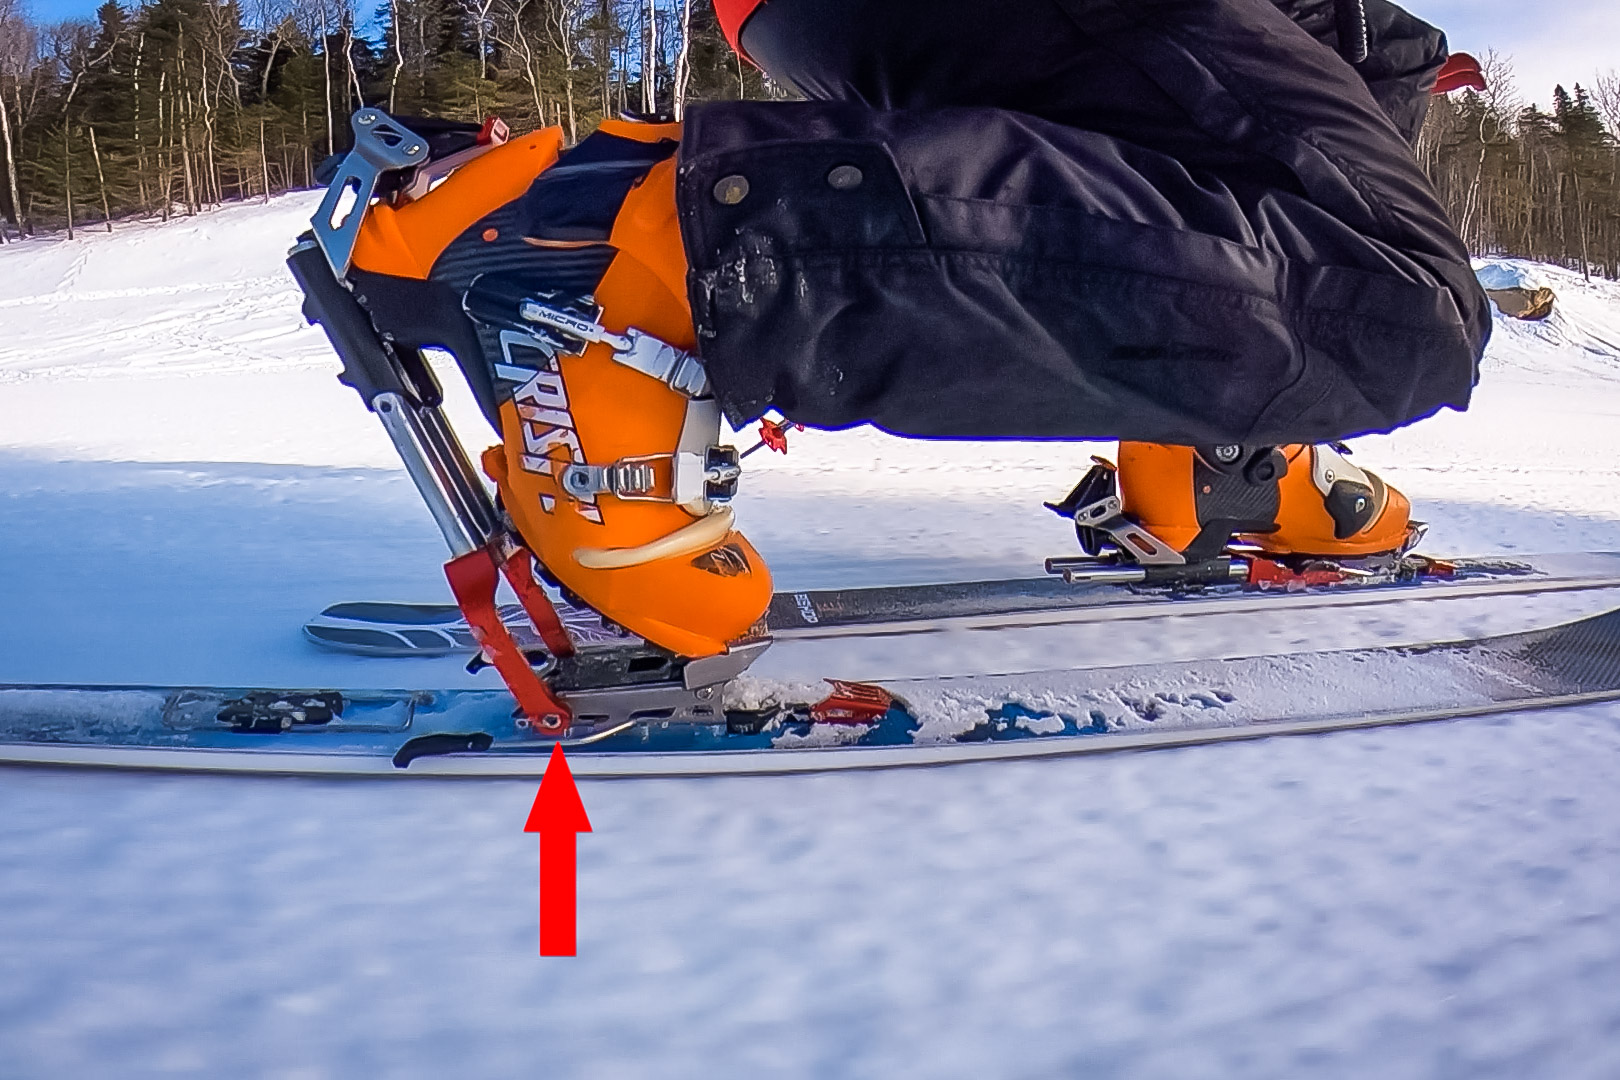 BMF Bishop Full Review | Absolute Telemark